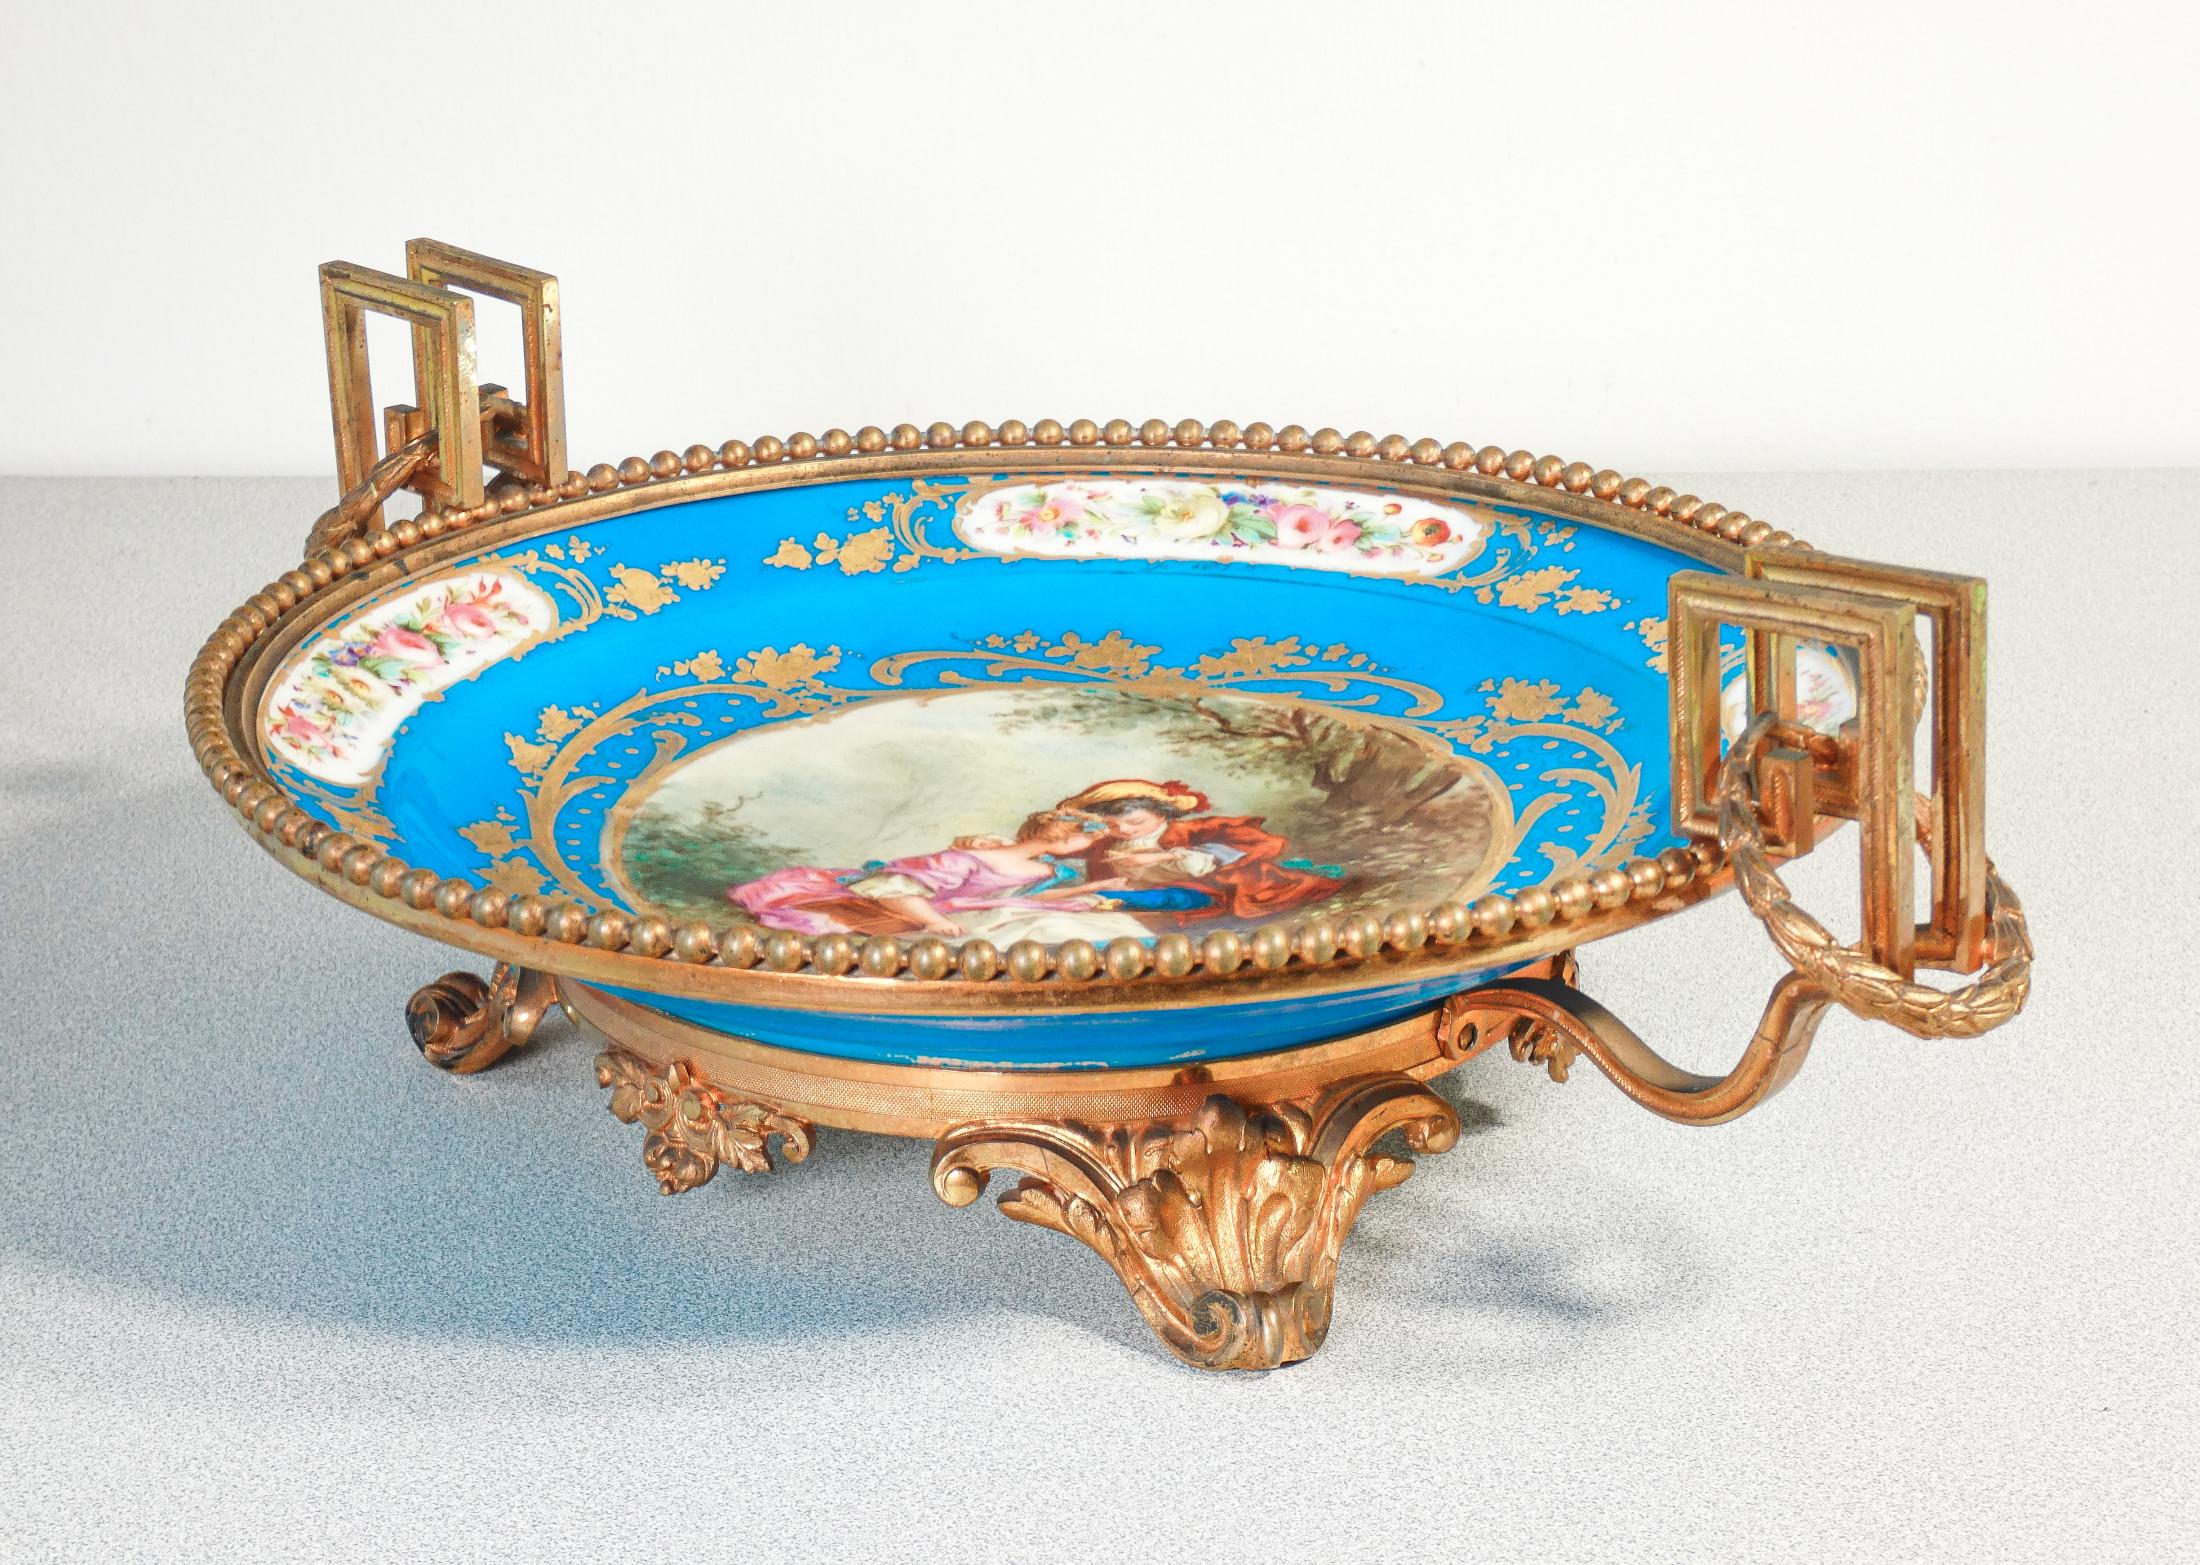 20th Century Hand-painted French porcelain riser with gallant scene. Early twentieth century